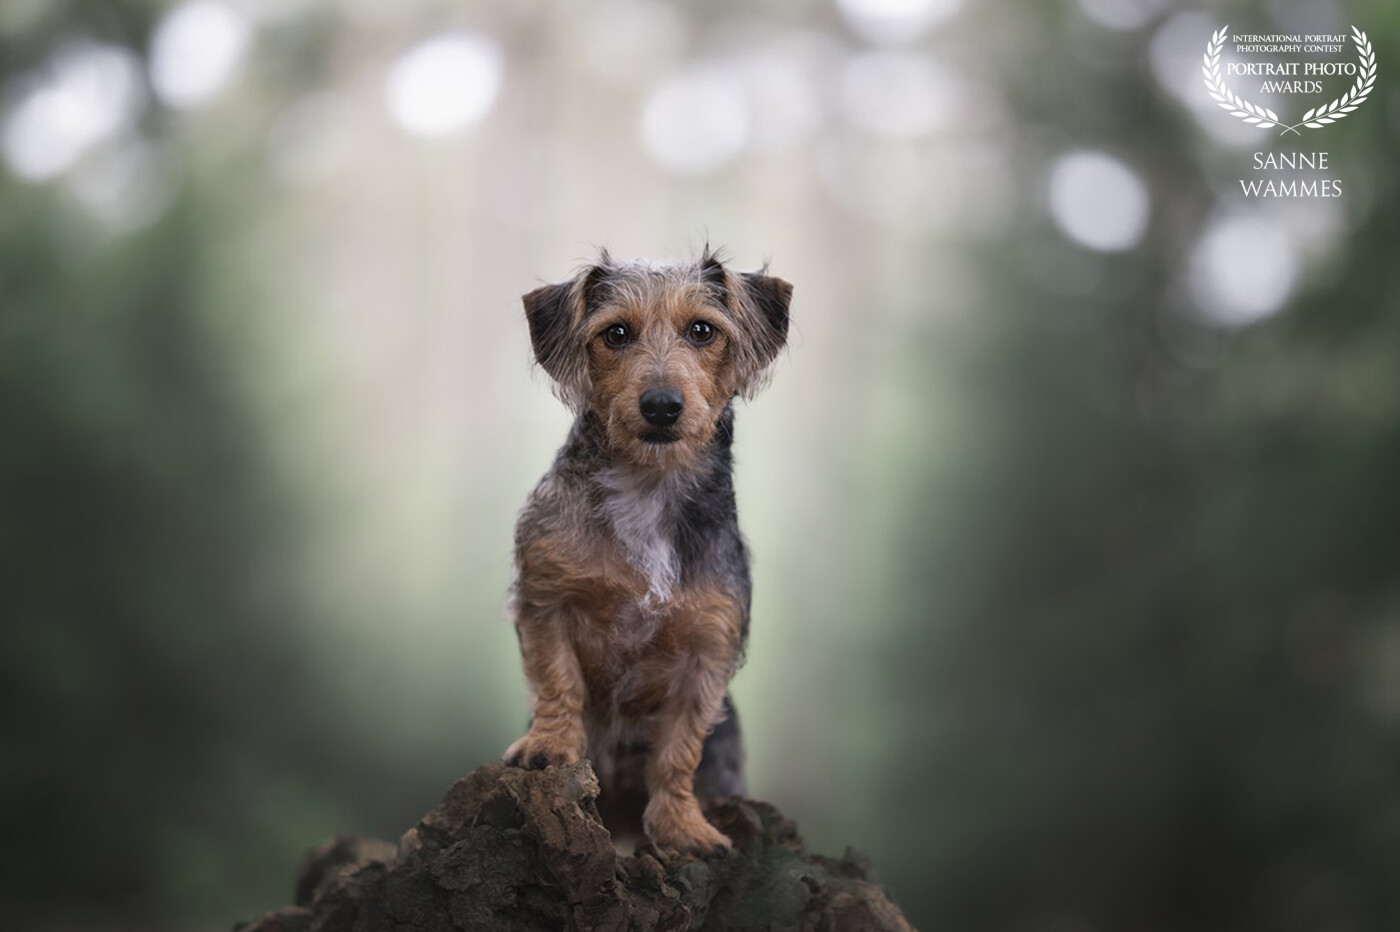 I really enjoy photographing dogs. I find it most beautiful in nature, with the right light in the morning or afternoon. This is Juul, a dachshund, in a setting where I felt everything was right.